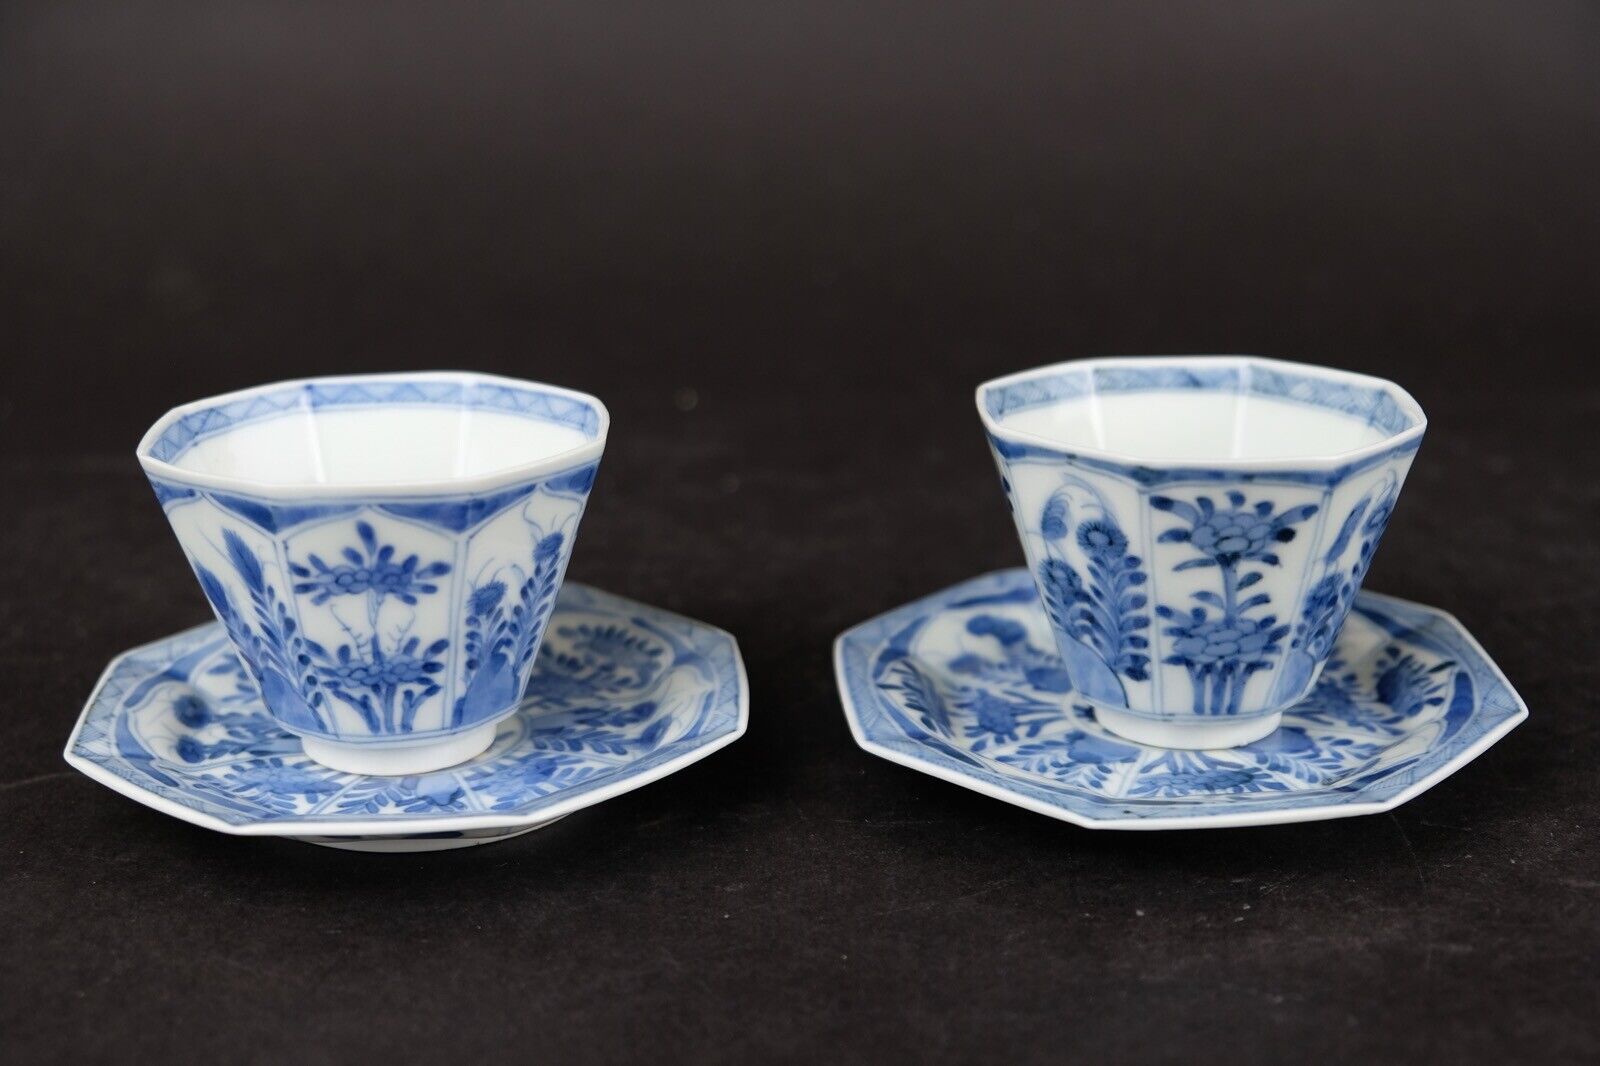 Beautiful Set Antique Hexagonal Blue And White Porcelain Cups And Saucers 19th C